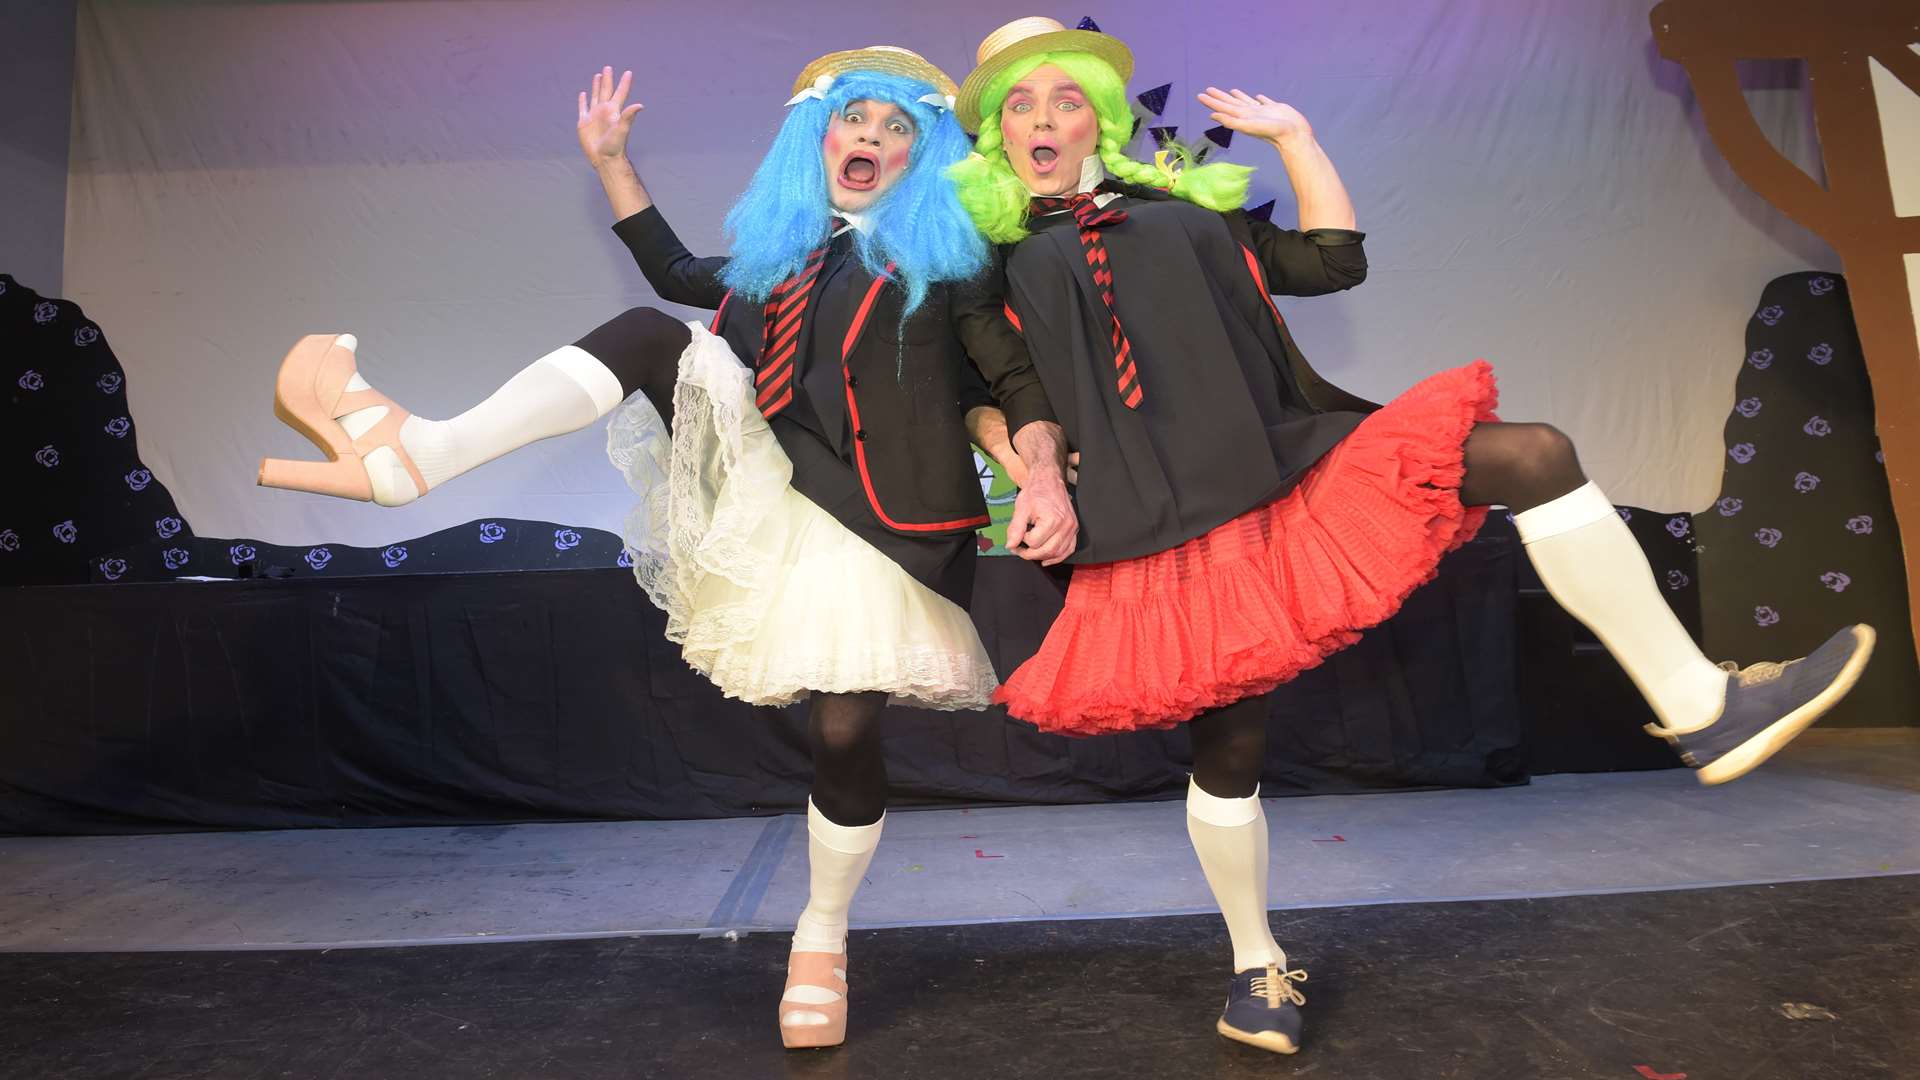 Adam Parks and Scott Cain as the Ugly Sisters in the DODS production of Cinderella.